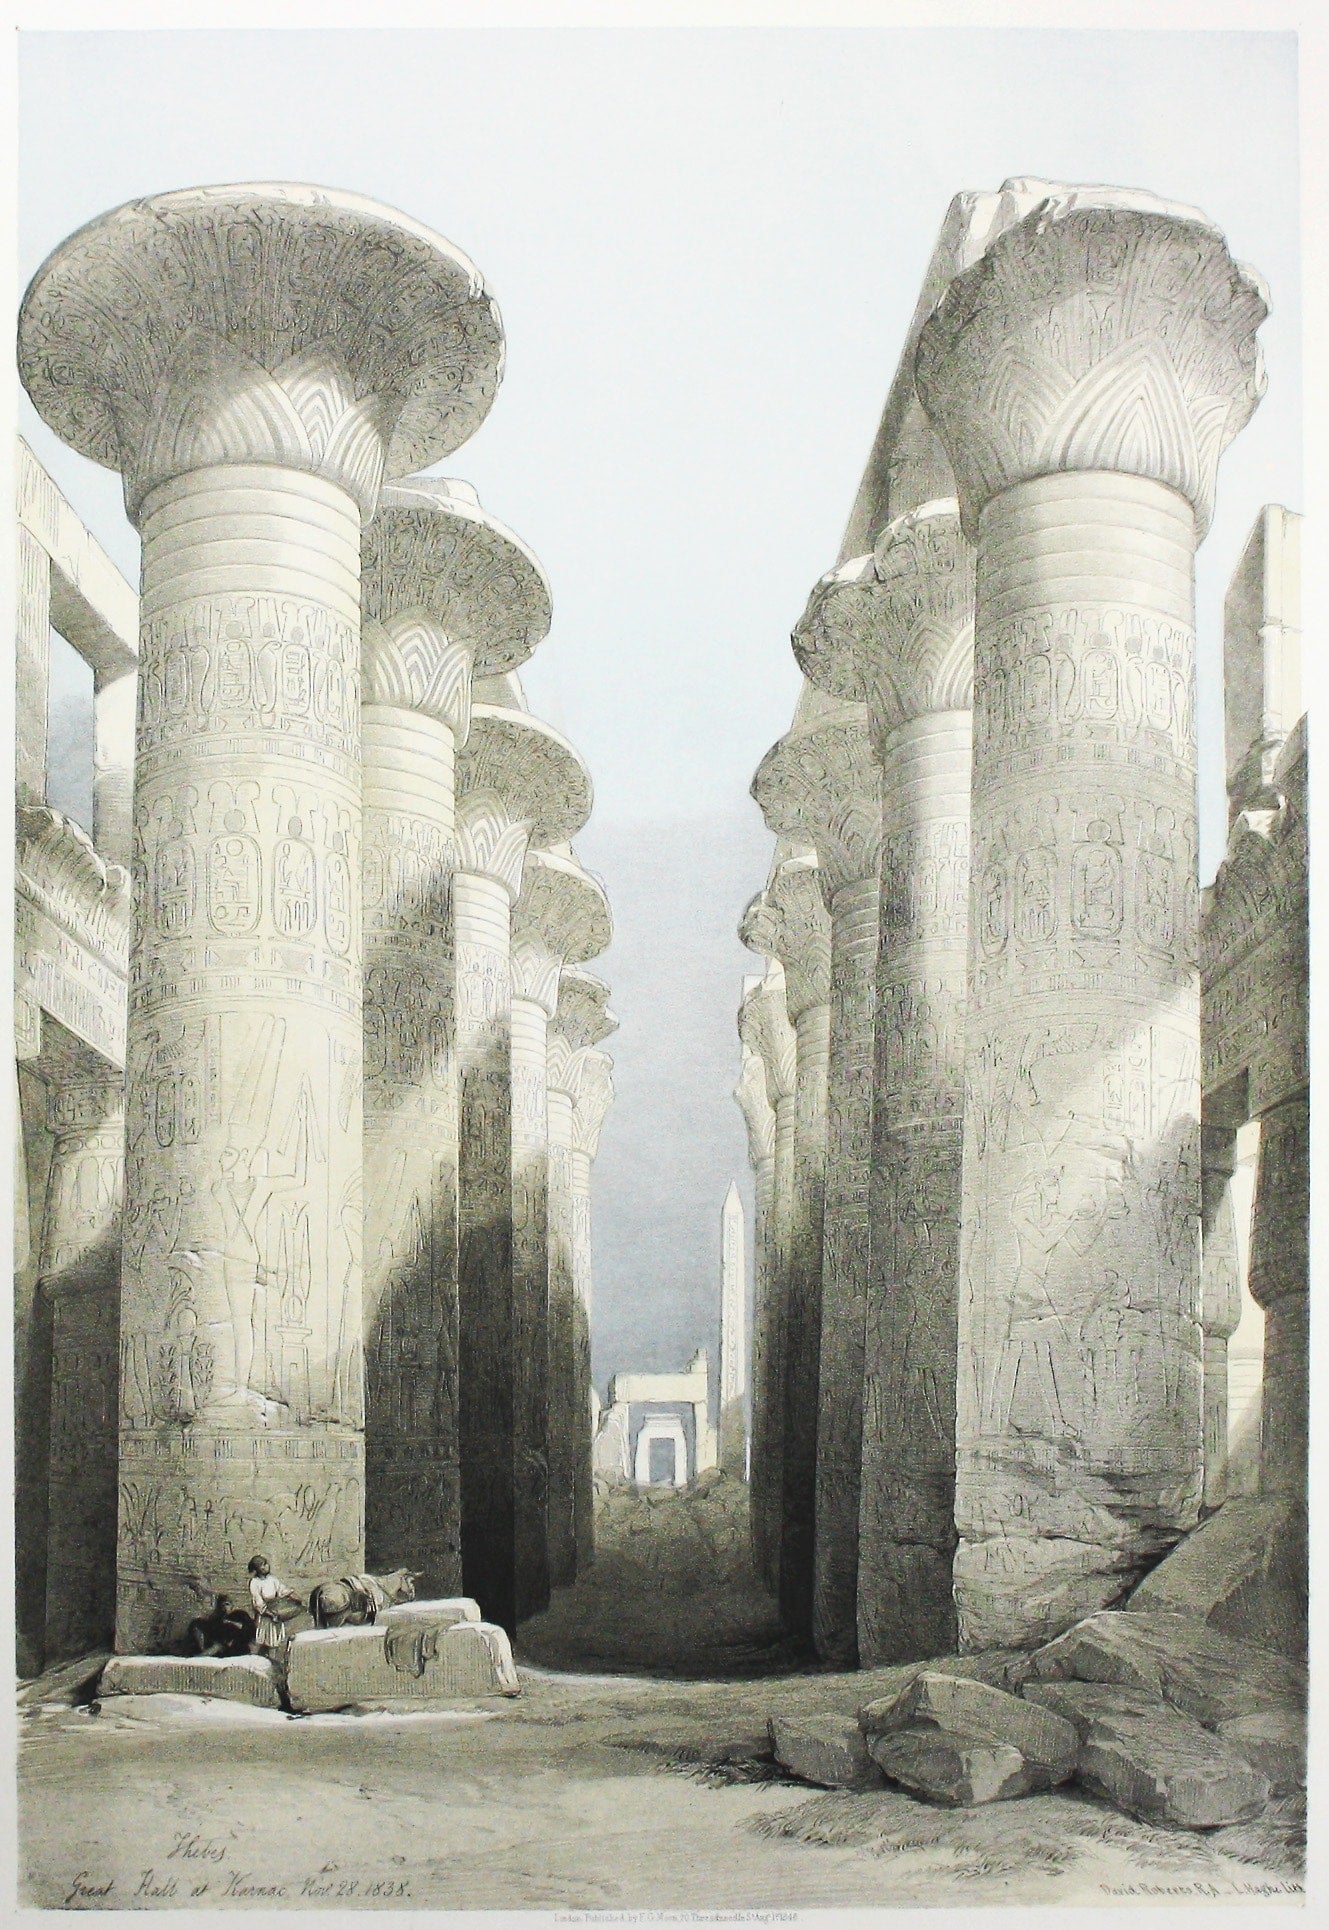 Great Hall at Karnac, Thebes